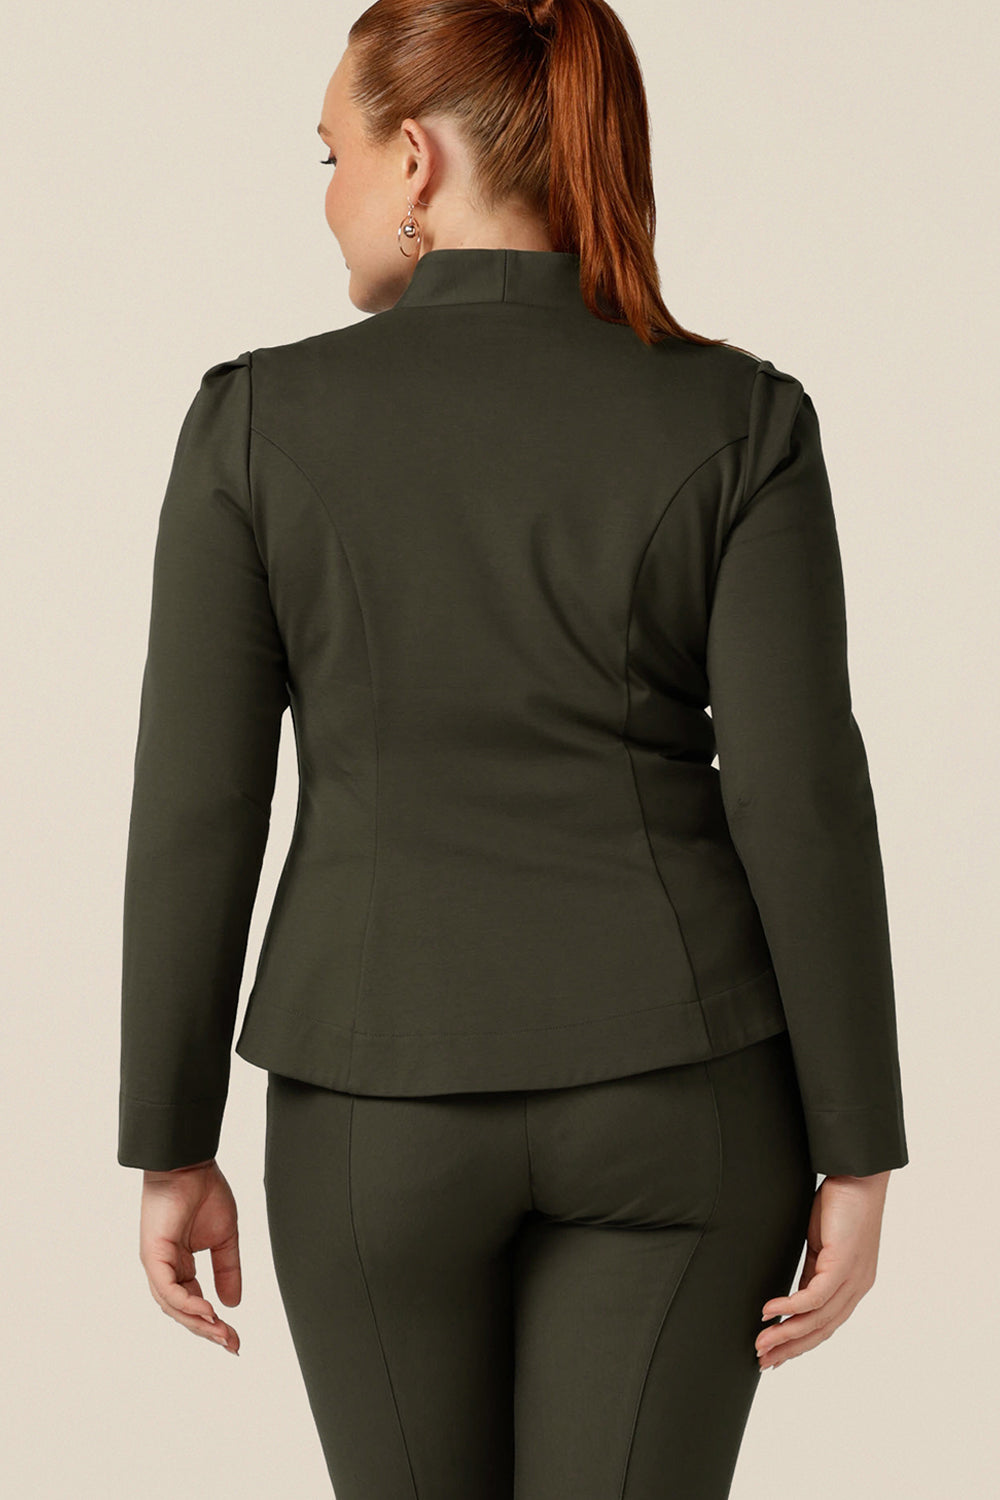 back view of a size 12 curvy woman wearing a tailored jacket with long sleeves, collarless V-neckline and zip fastening. Made in Australia in olive green ponte jersey, this is a quality-made, comfortable workwear jacket.